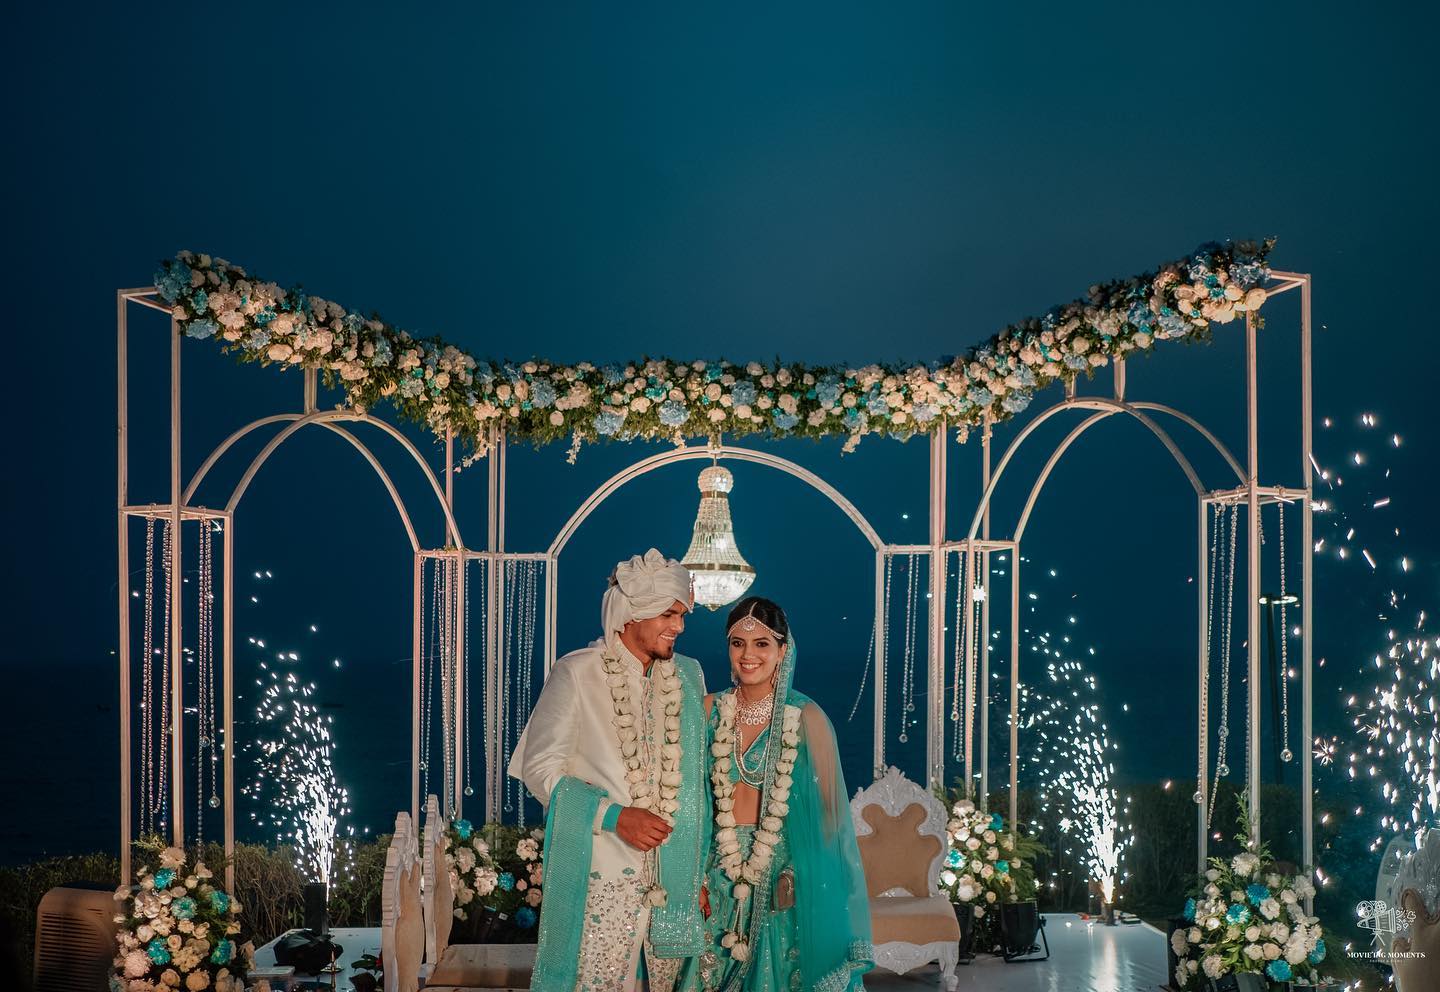 Rahul Chahar's Wedding Pictures